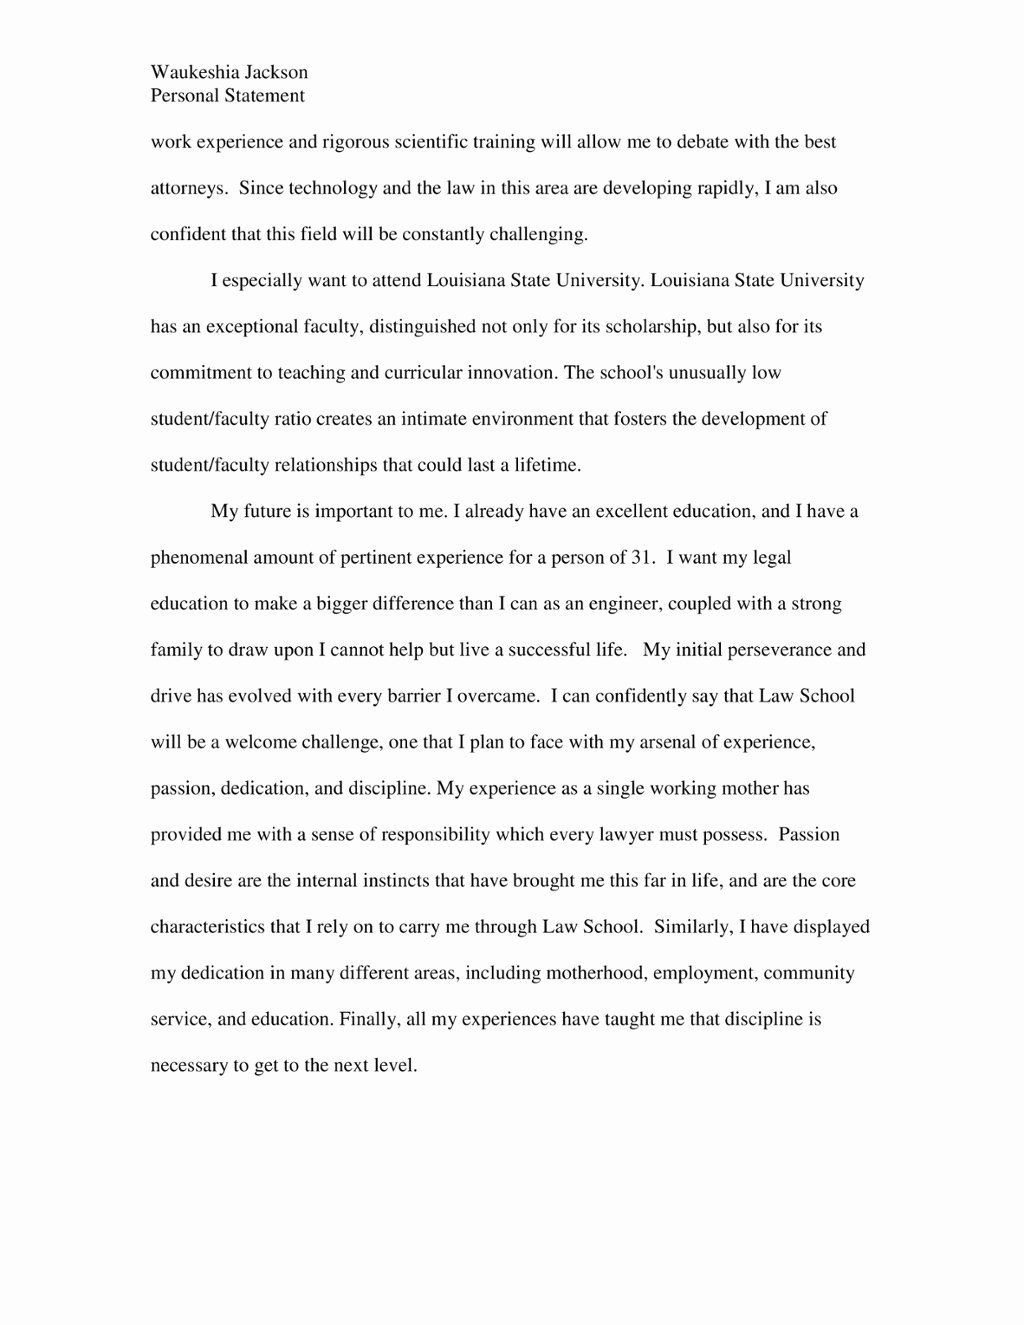 Personal Statement About Yourself Example Luxury 2 Law School Personal Statements that Succeeded